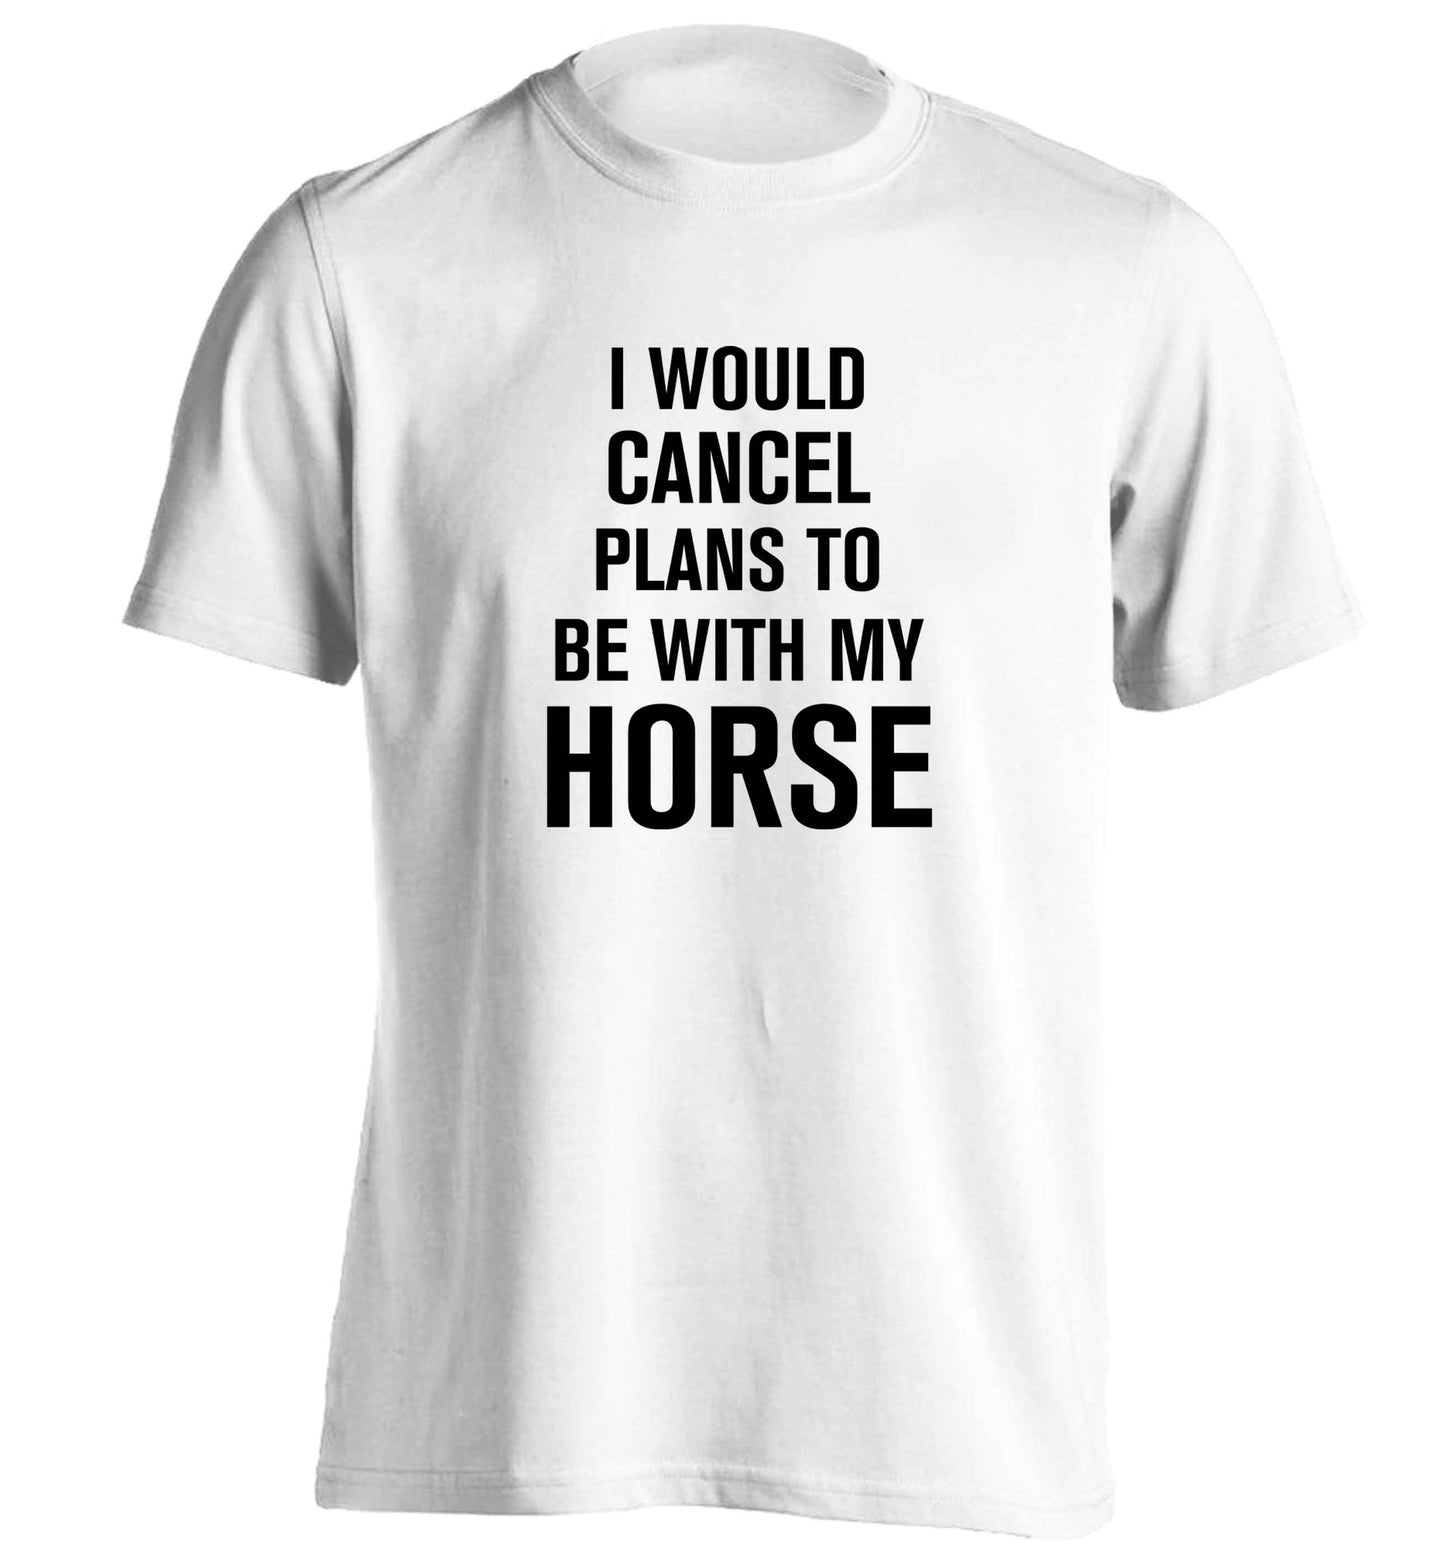 I will cancel plans to be with my horse adults unisex white Tshirt 2XL